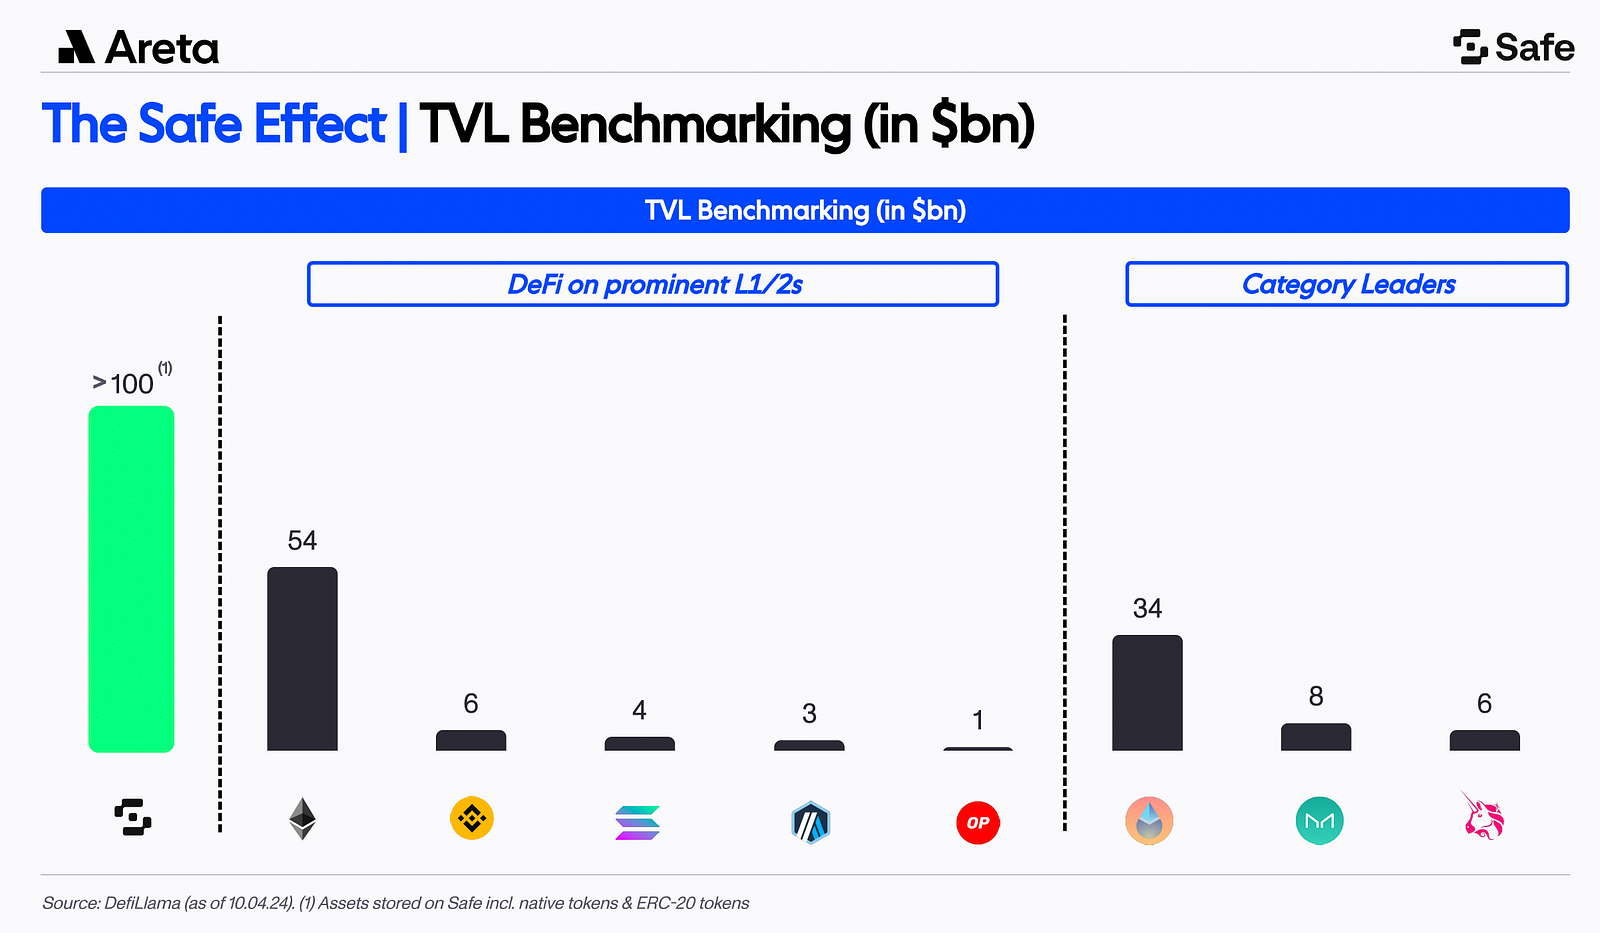 TVL benchmarking prepared by Areta, a crypto-native investment banking firm, showcases Safe’s significance to the overall ecosystem next to prominent L1s and other category leaders.